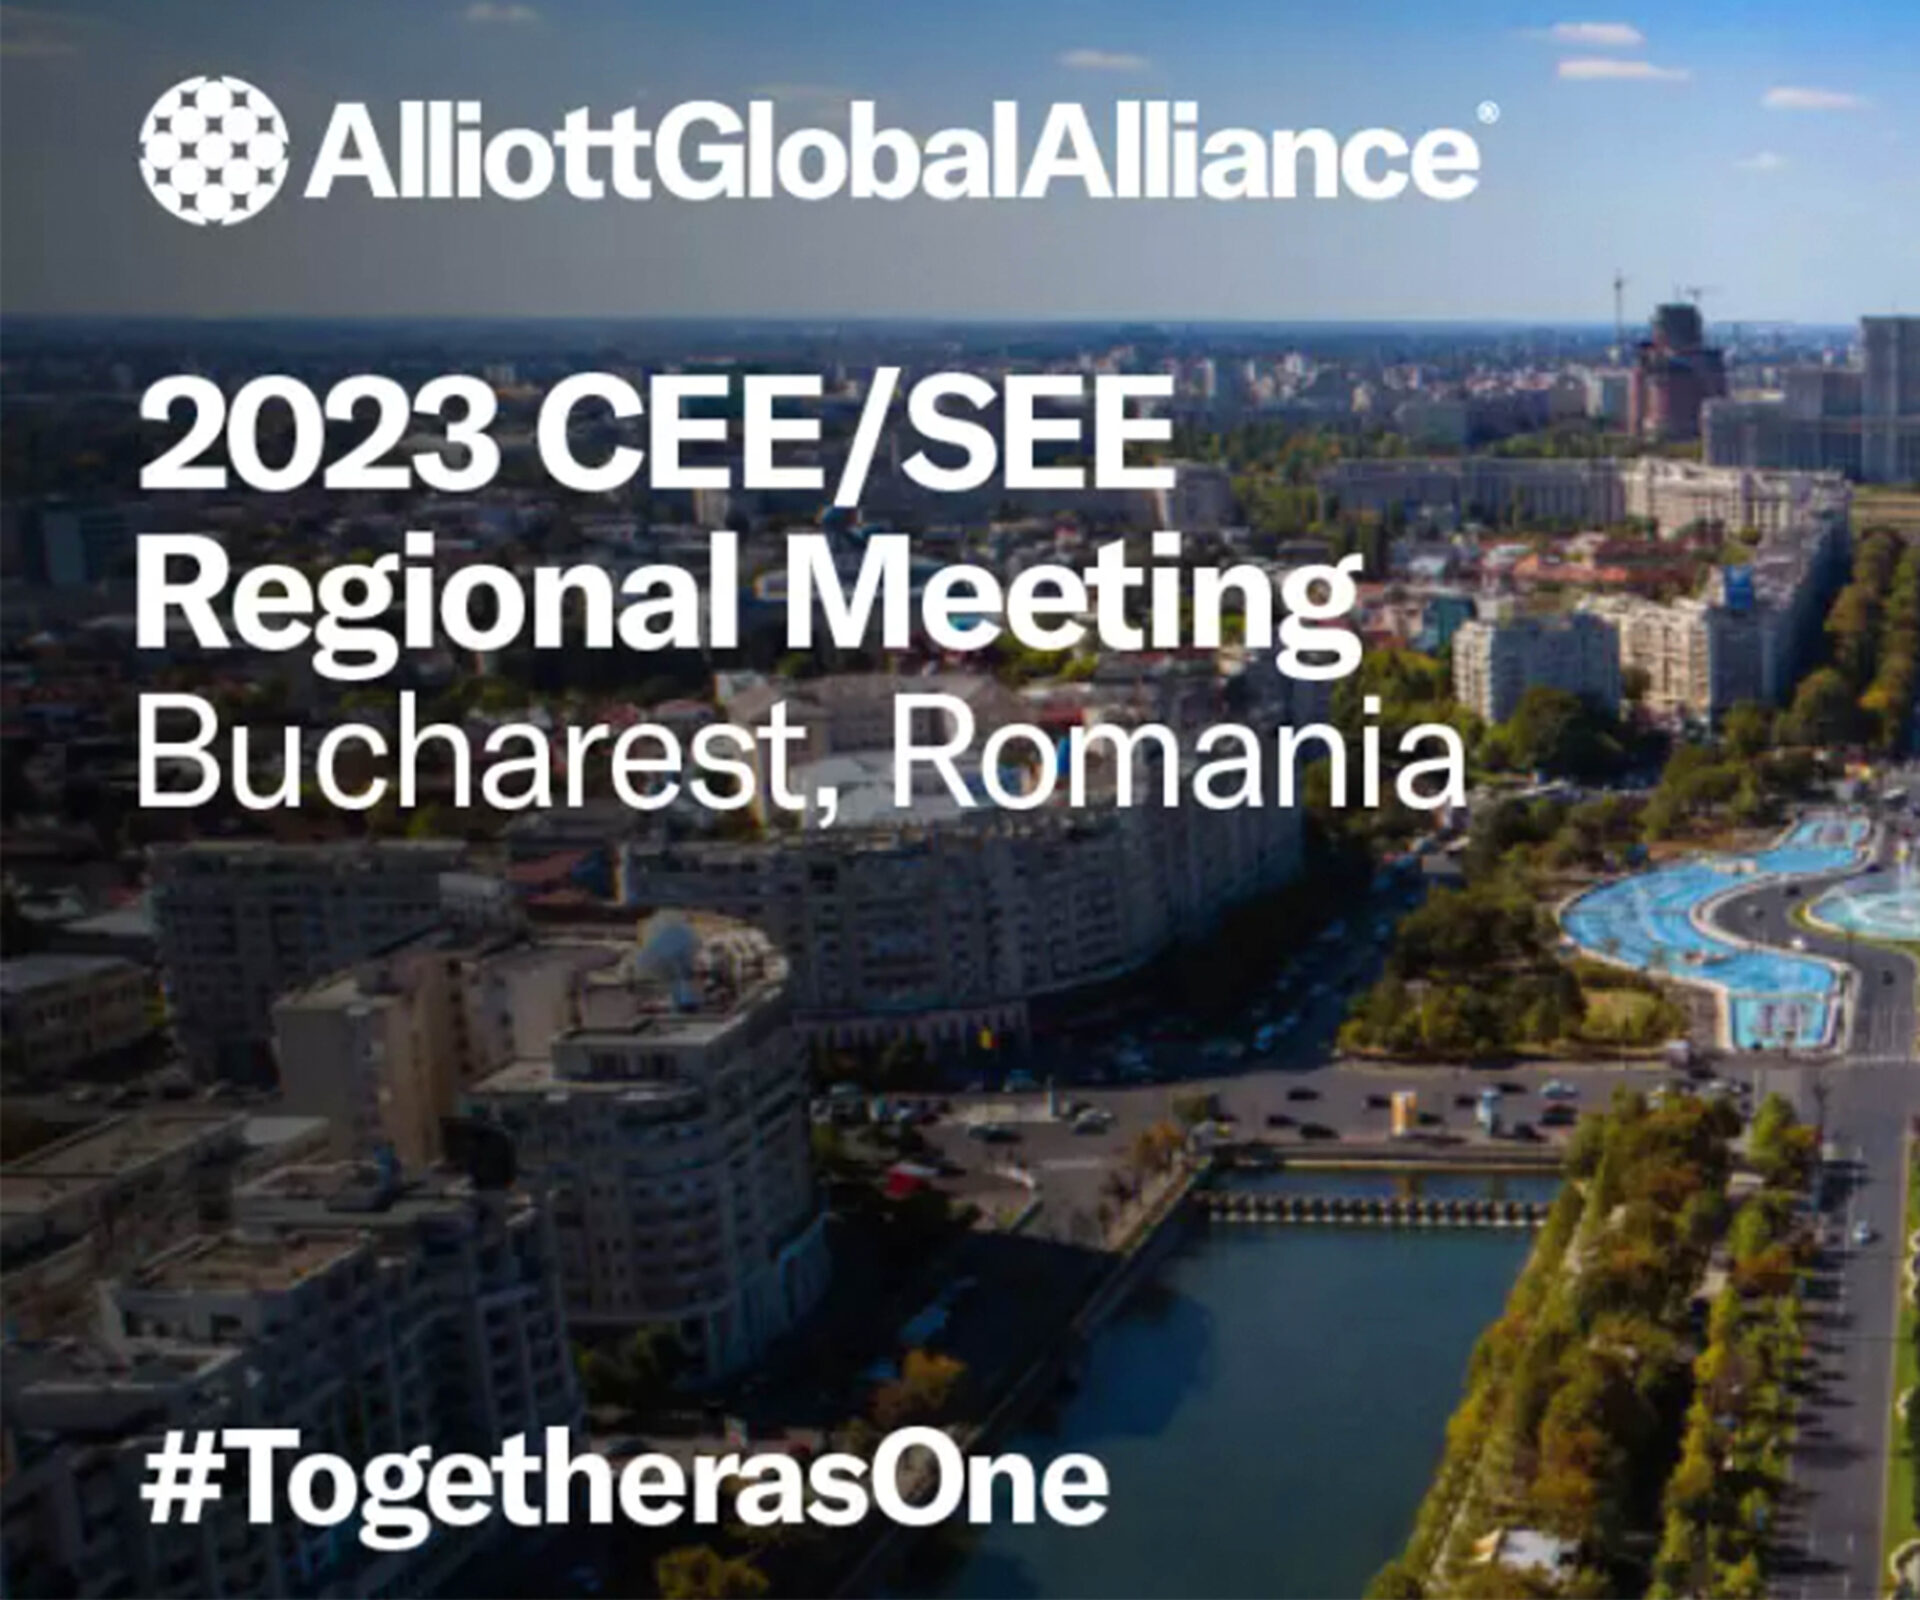 Our law firm at the 2023 CEE/SEE Regional Meeting in Bucharest